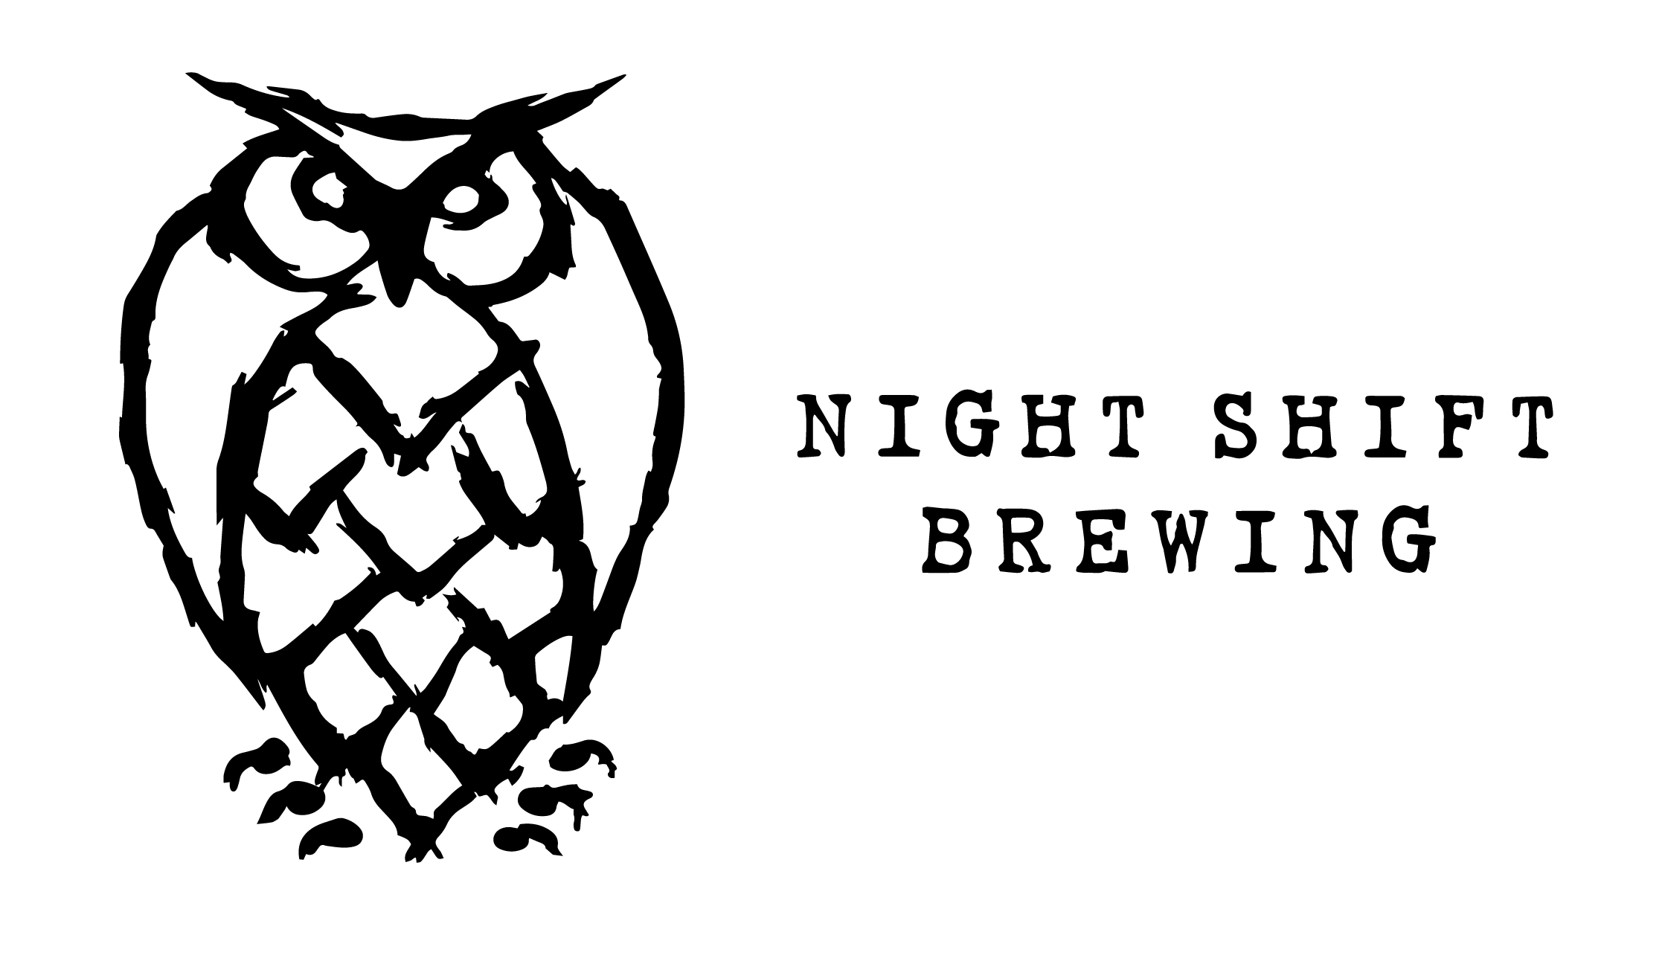 Logo of Night Shift Brewing with owl graphic